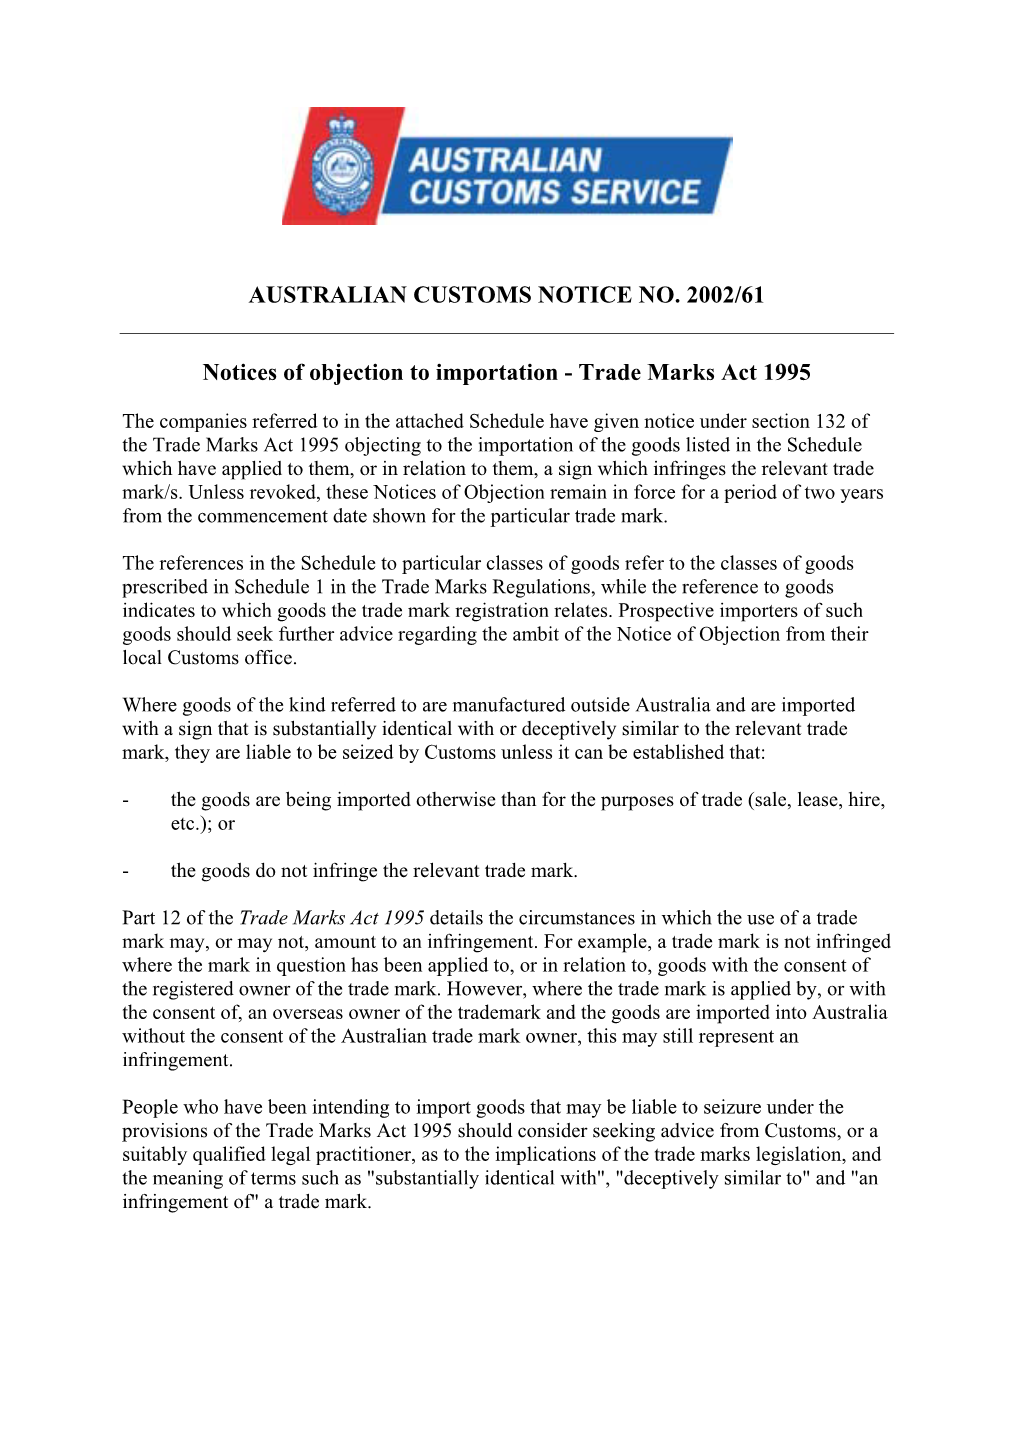 AUSTRALIAN CUSTOMS NOTICE NO. 2002/61 Notices of Objection To